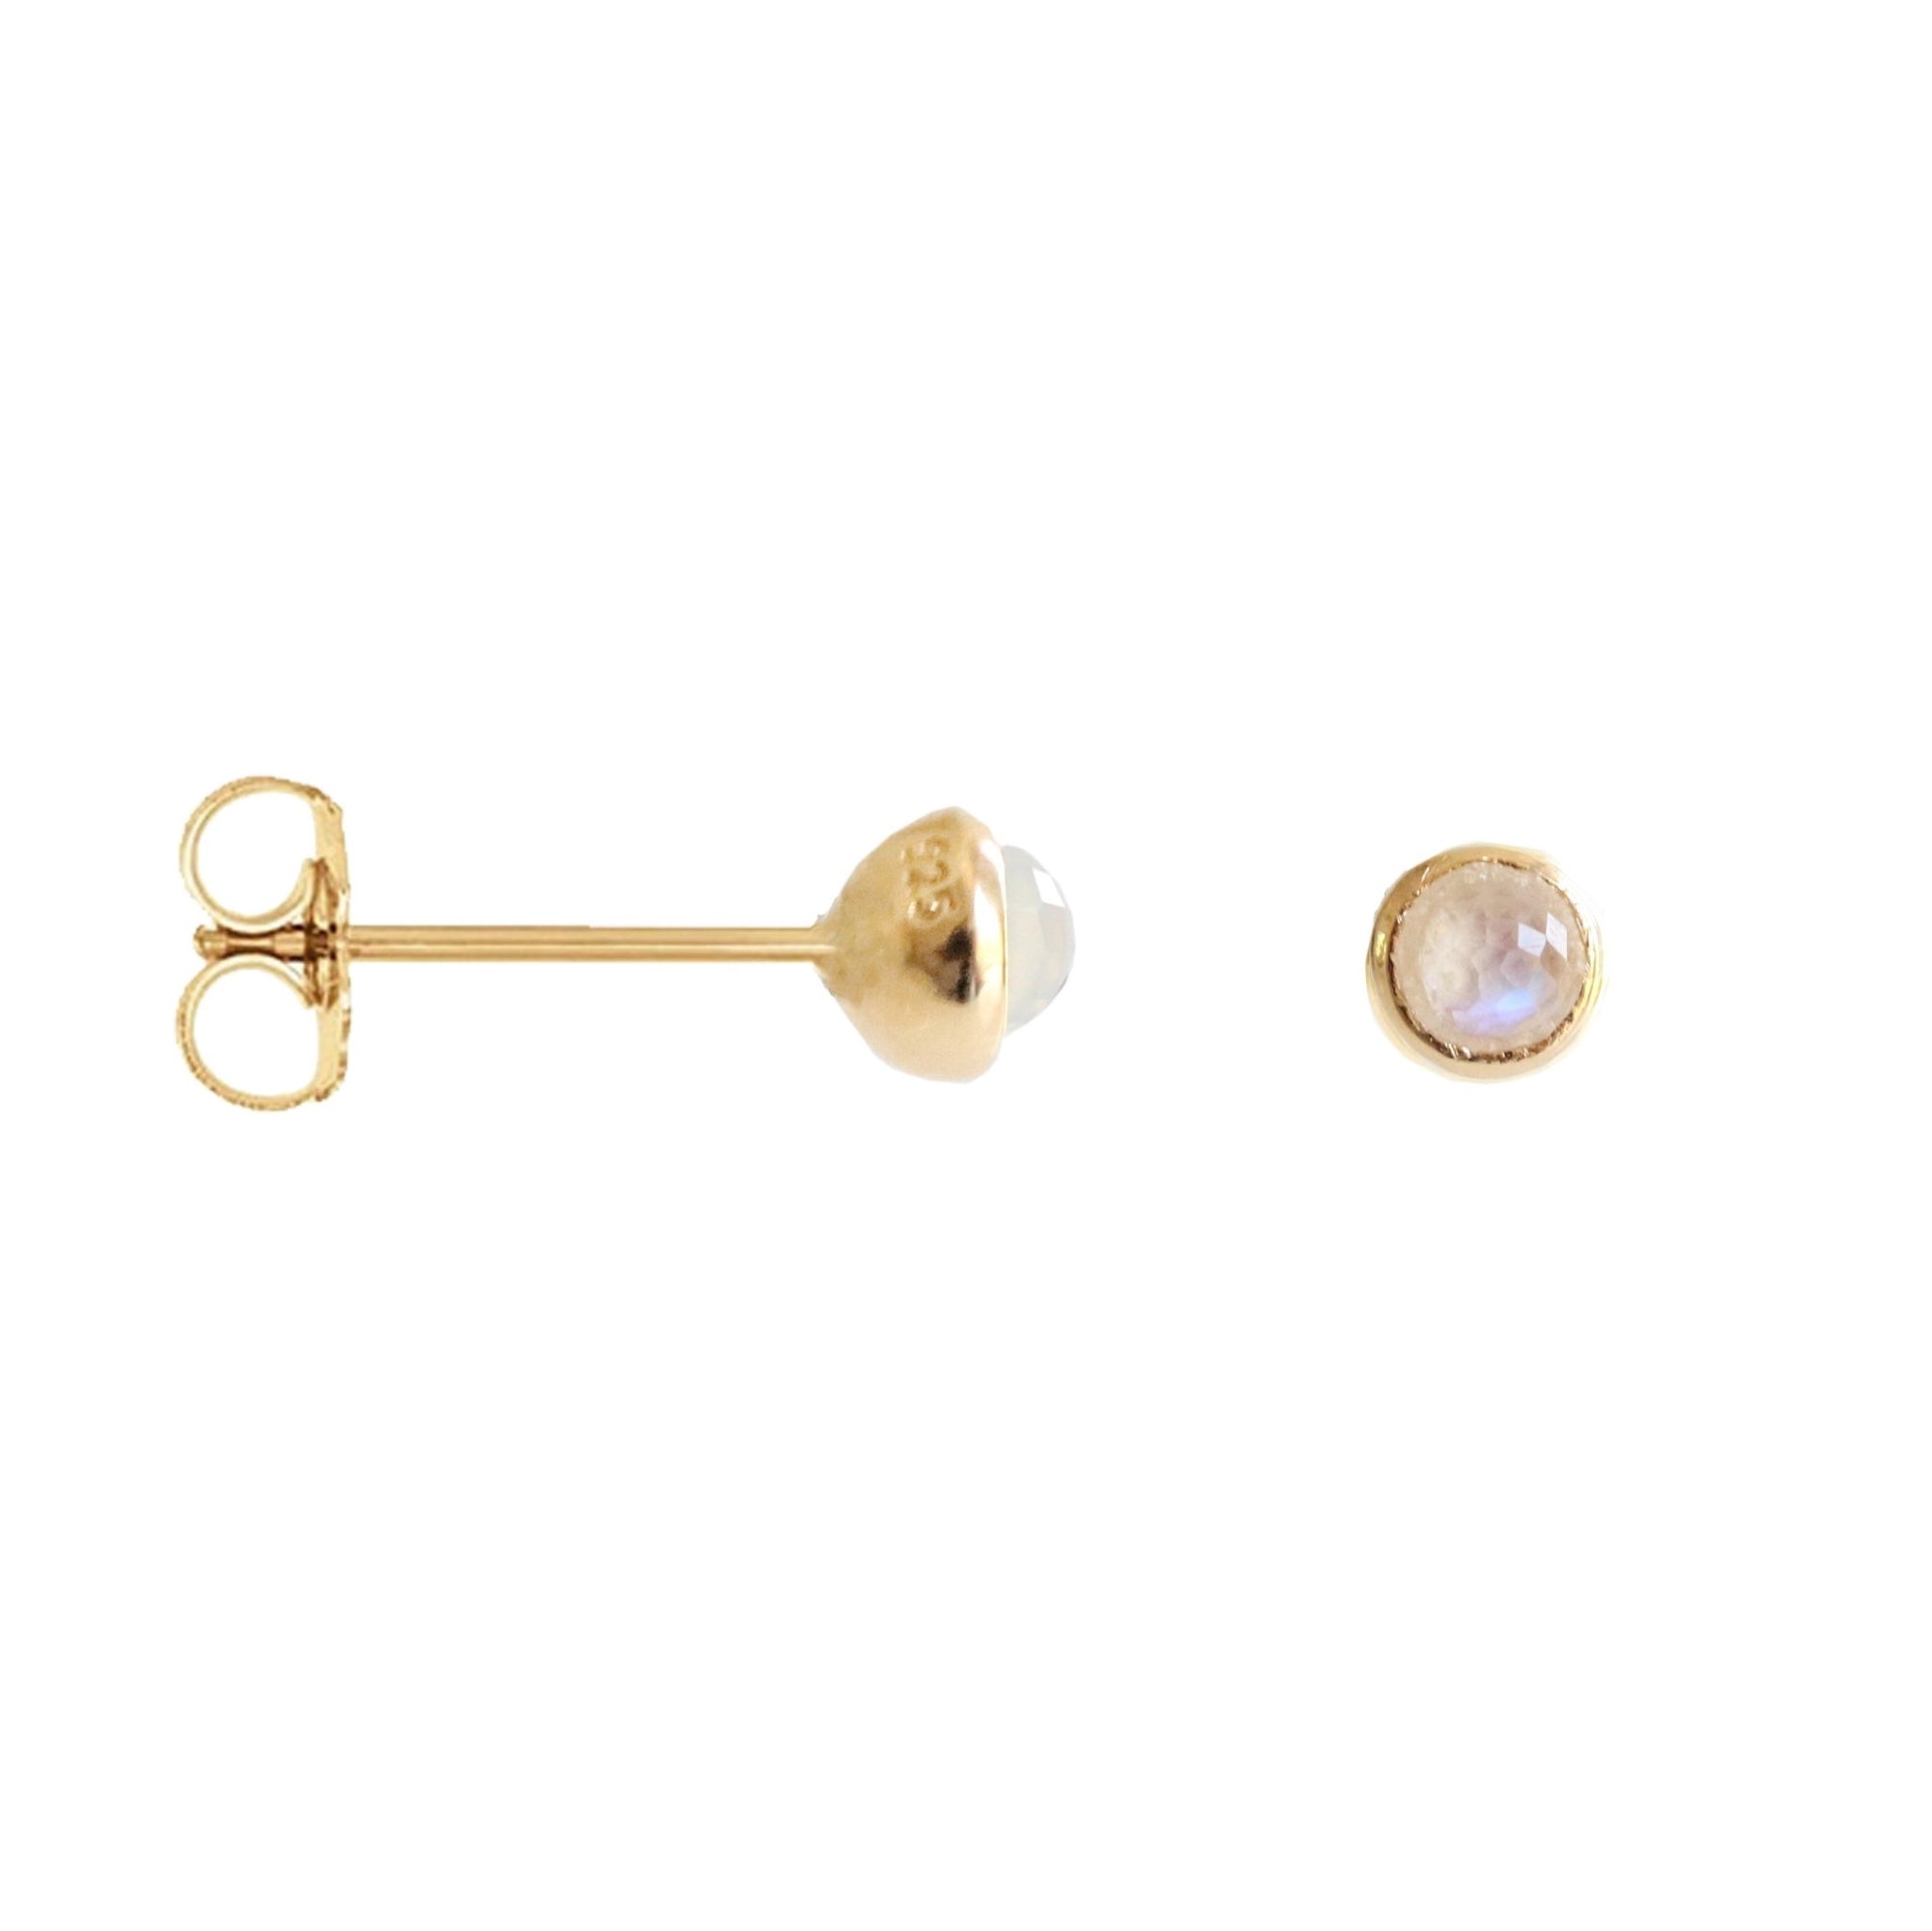 TINY PROTECT STUD EARRINGS - RAINBOW MOONSTONE & GOLD - SO PRETTY CARA COTTER